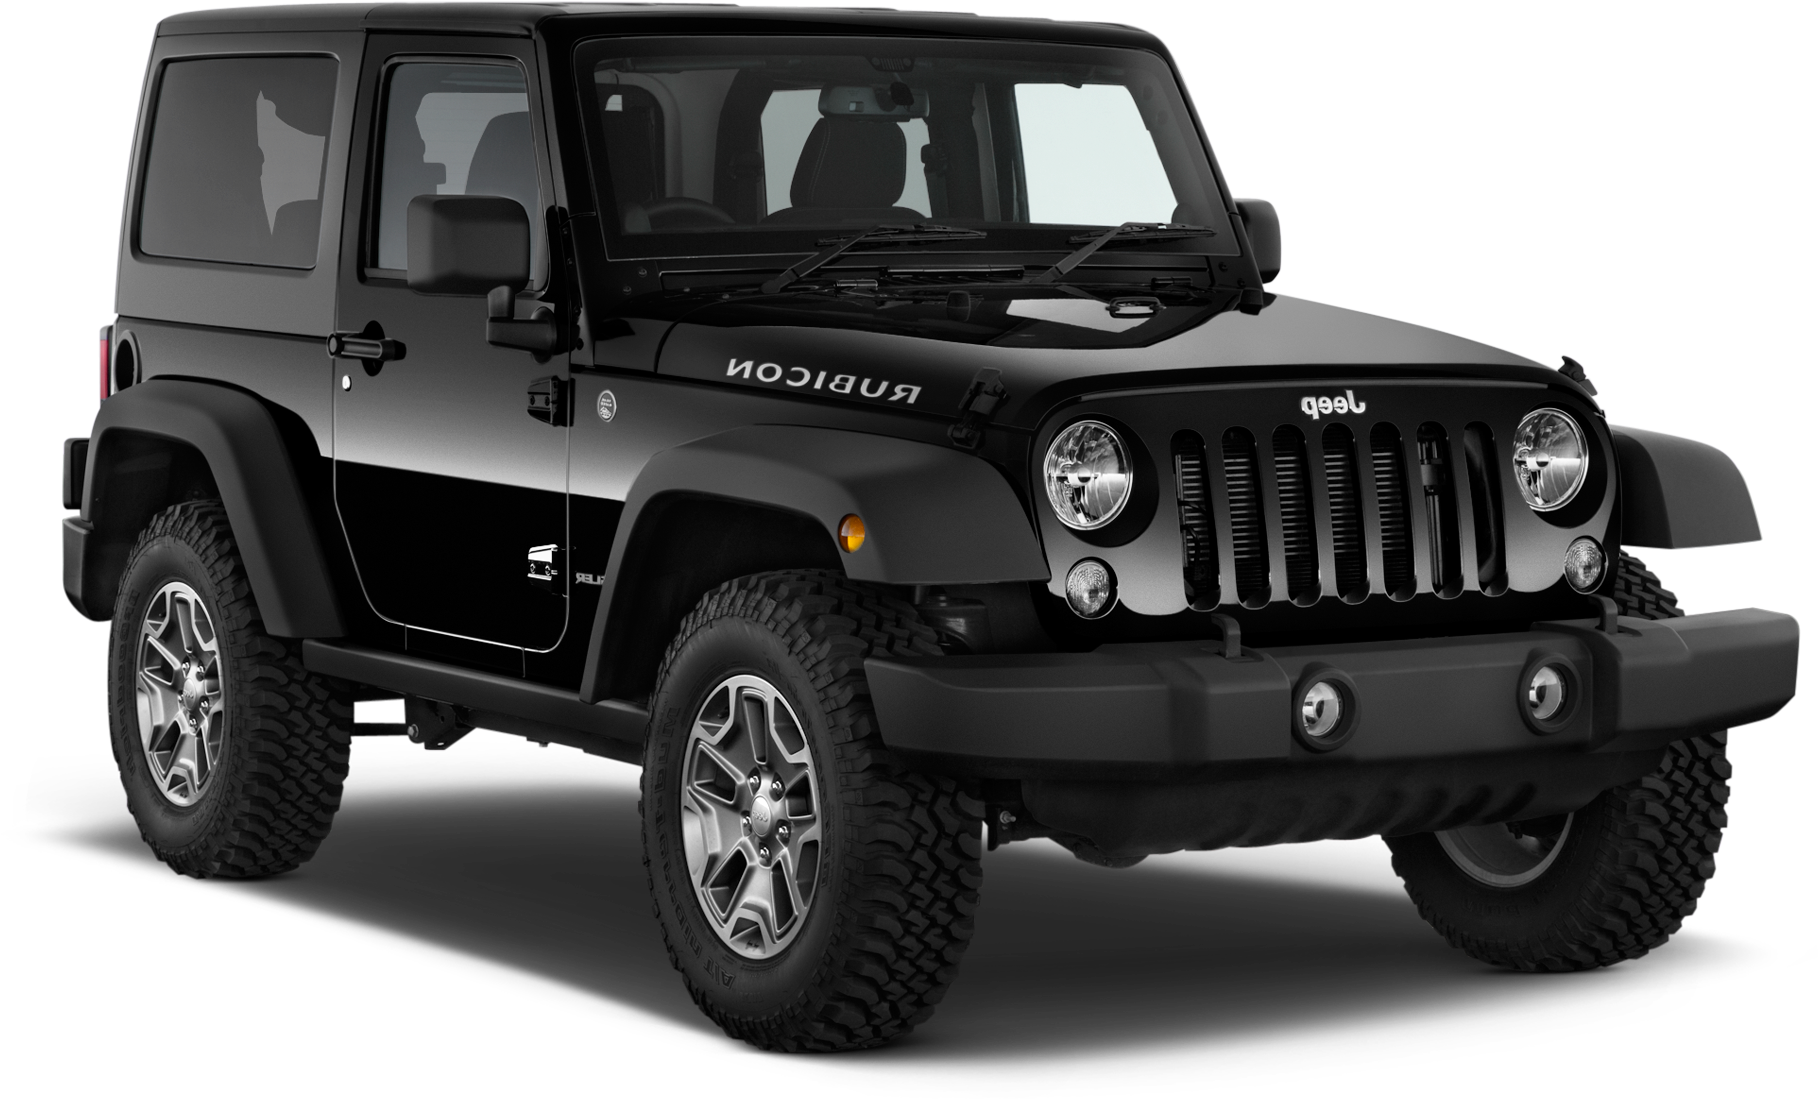 A Black Jeep With A Black Background